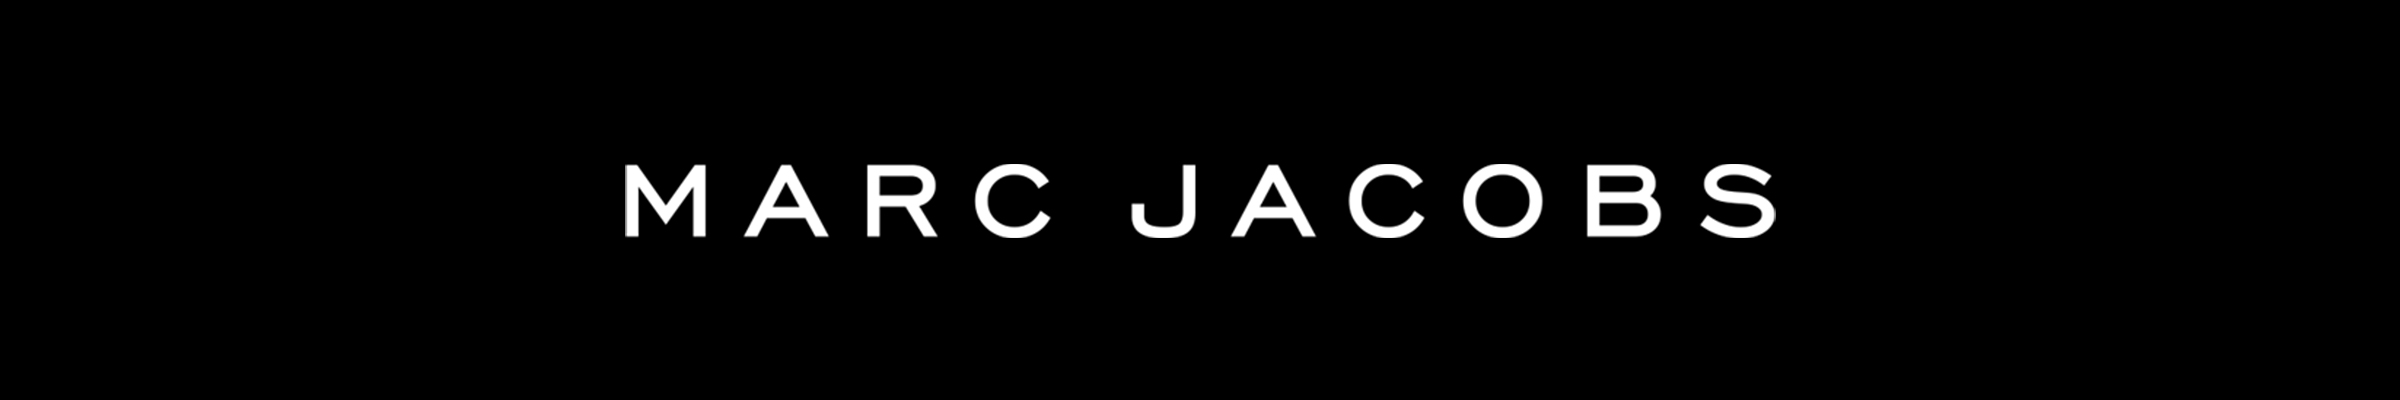 marc-jacobs-banner